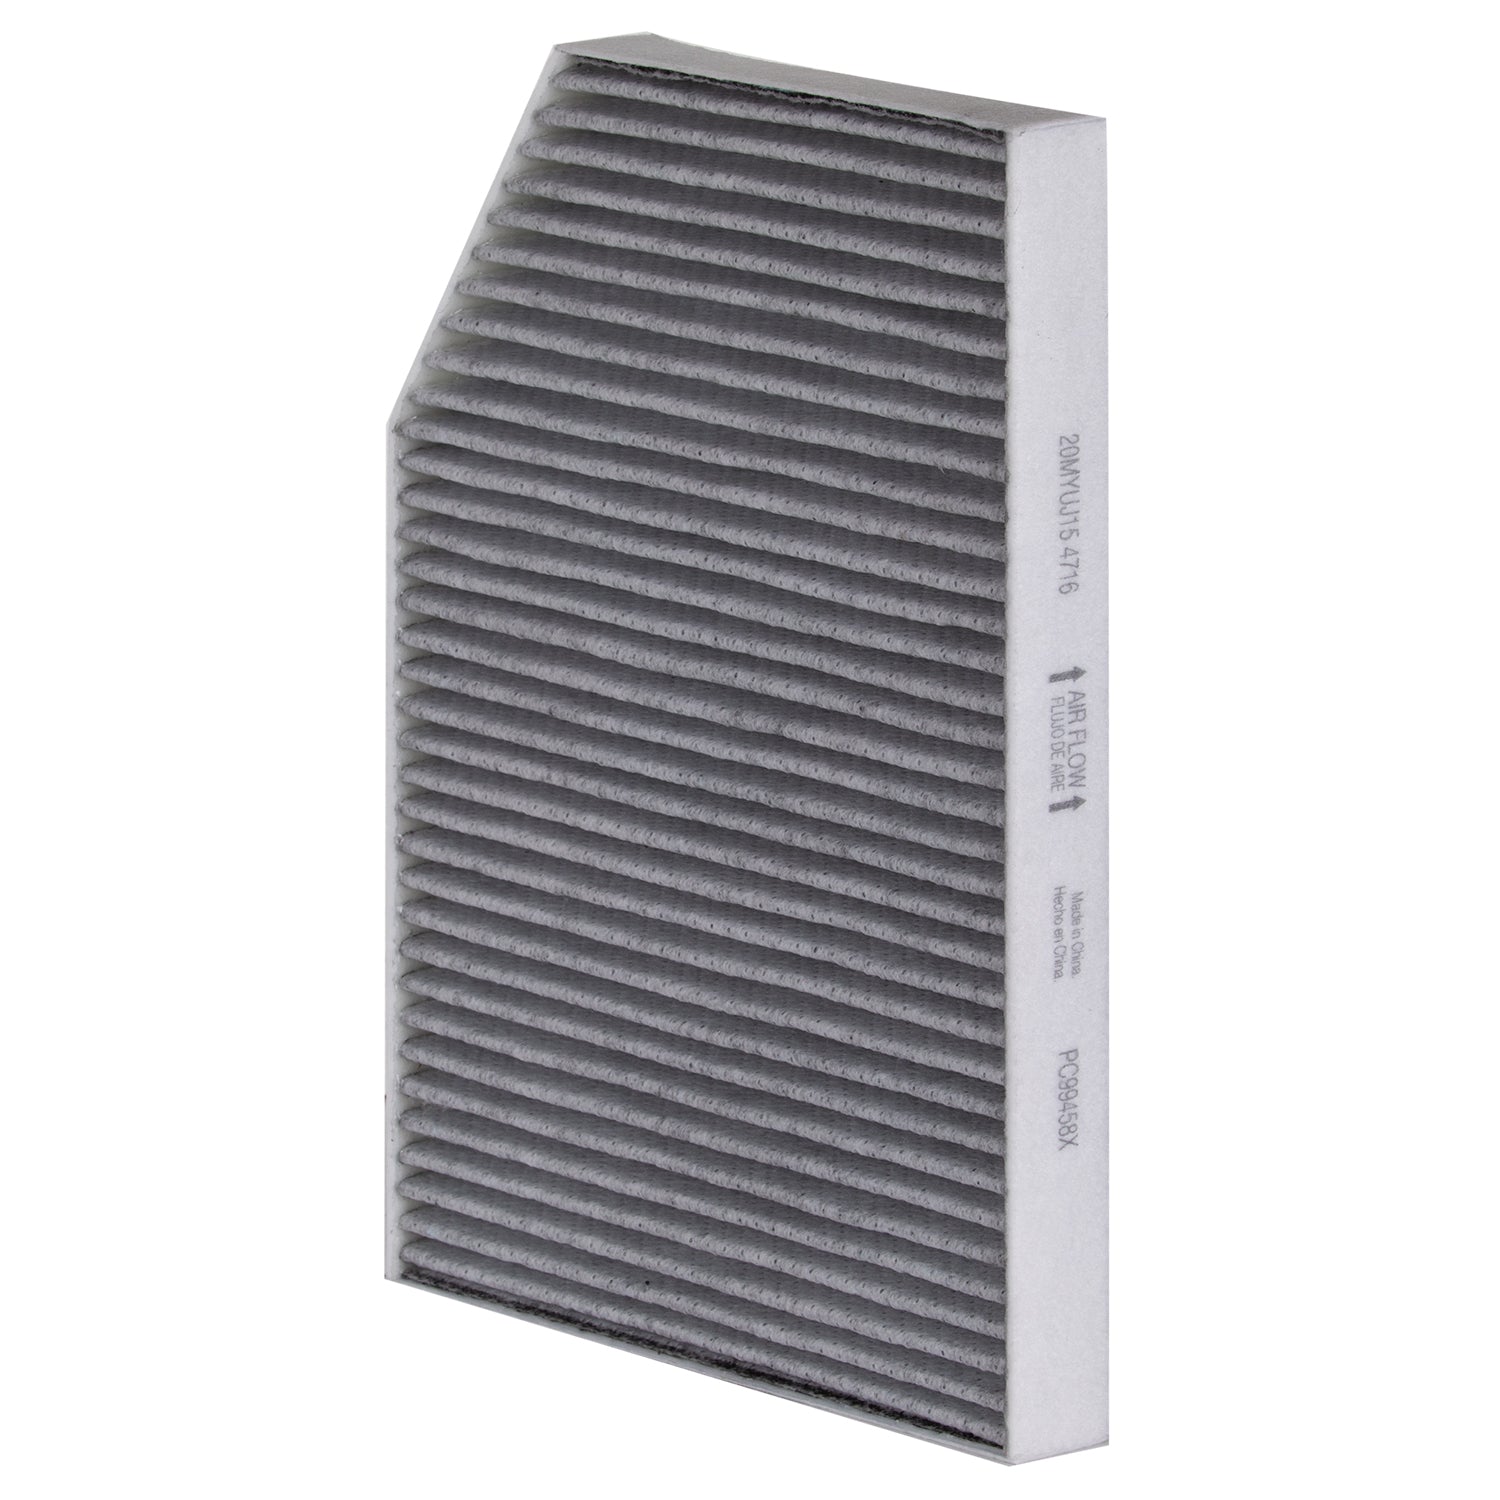 2020 BMW 330i Cabin Air Filter  PC99458X